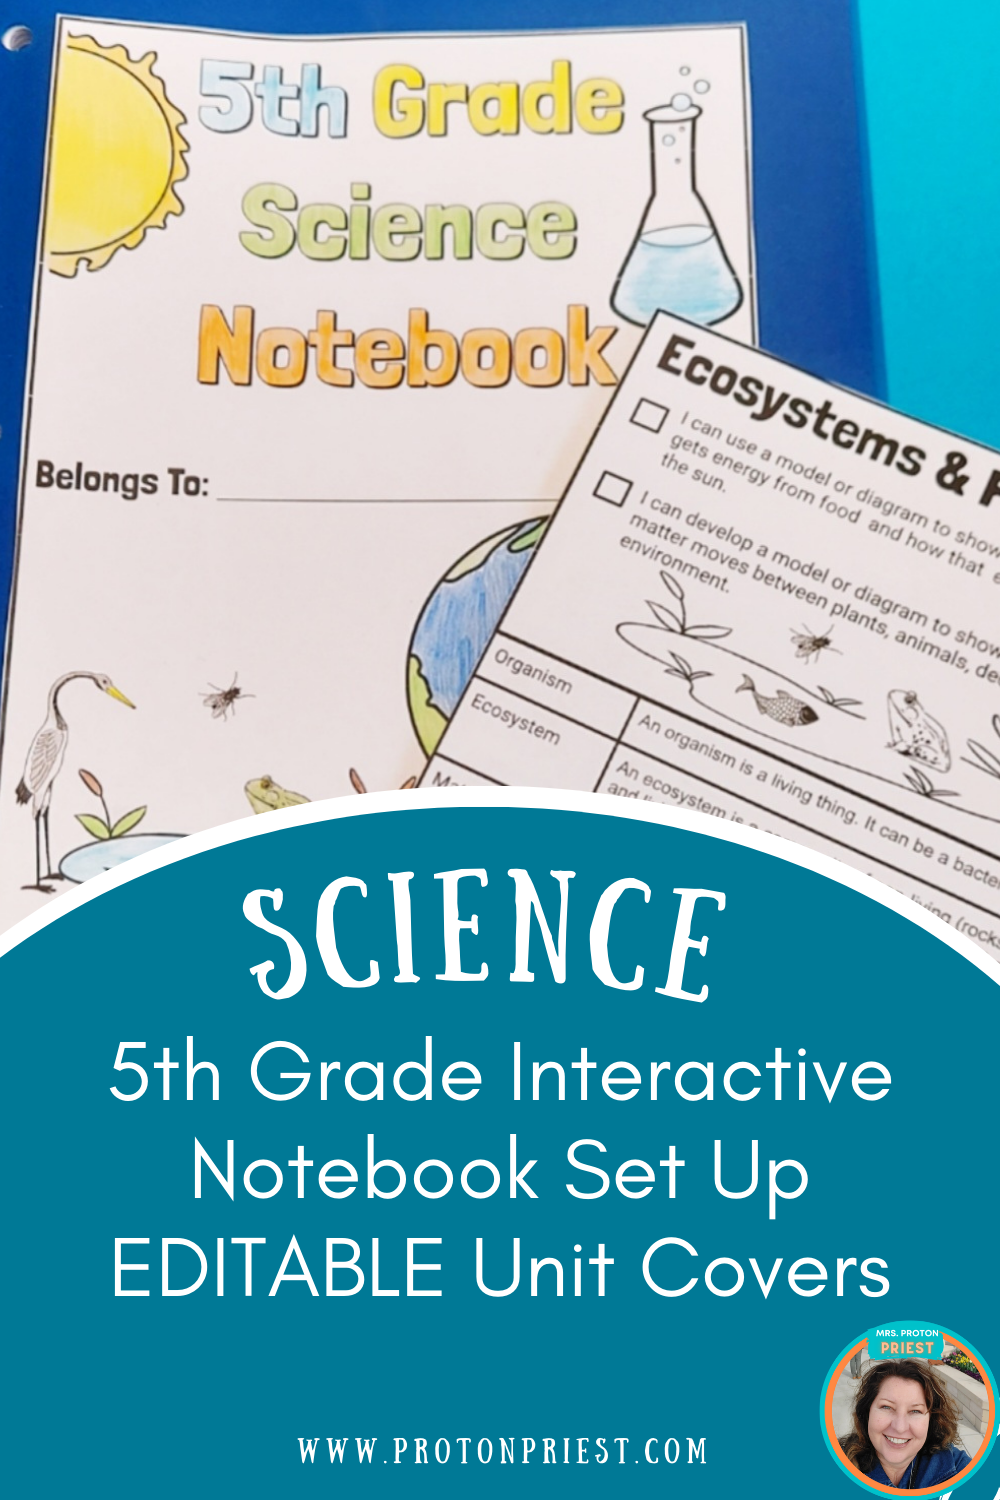 How to set up a 5th grade interactive science notebook